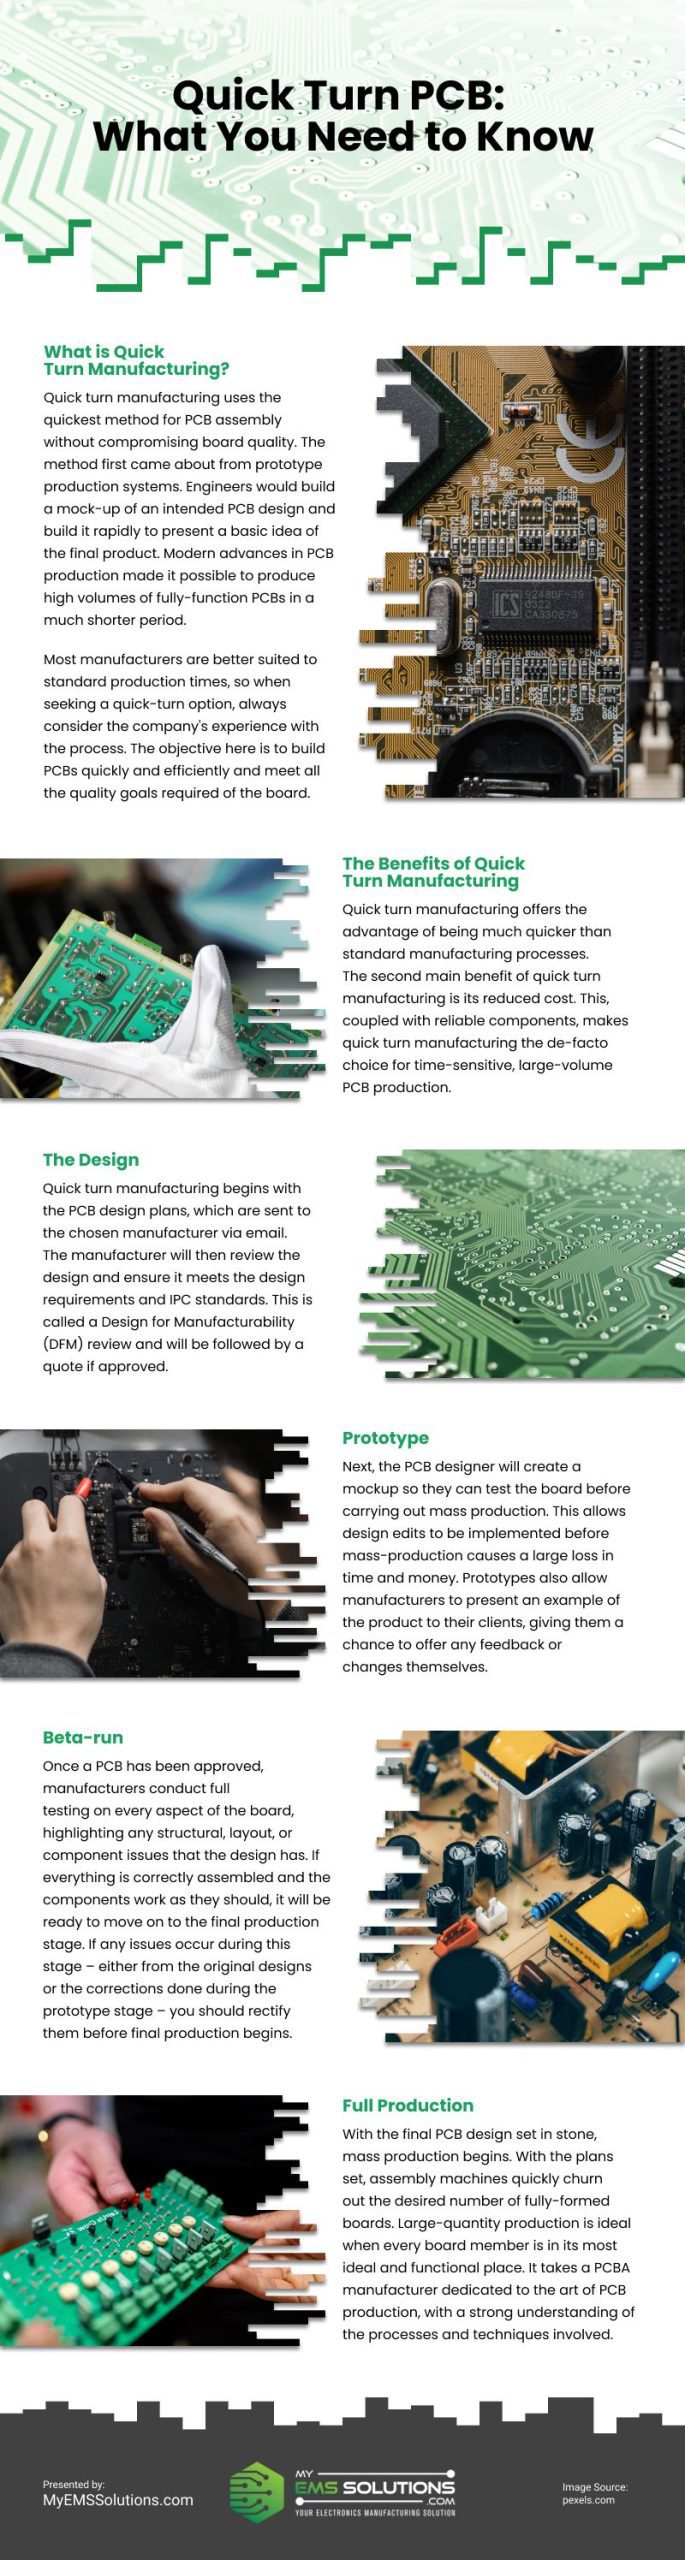 Quick Turn PCB: What You Need to Know Infographic